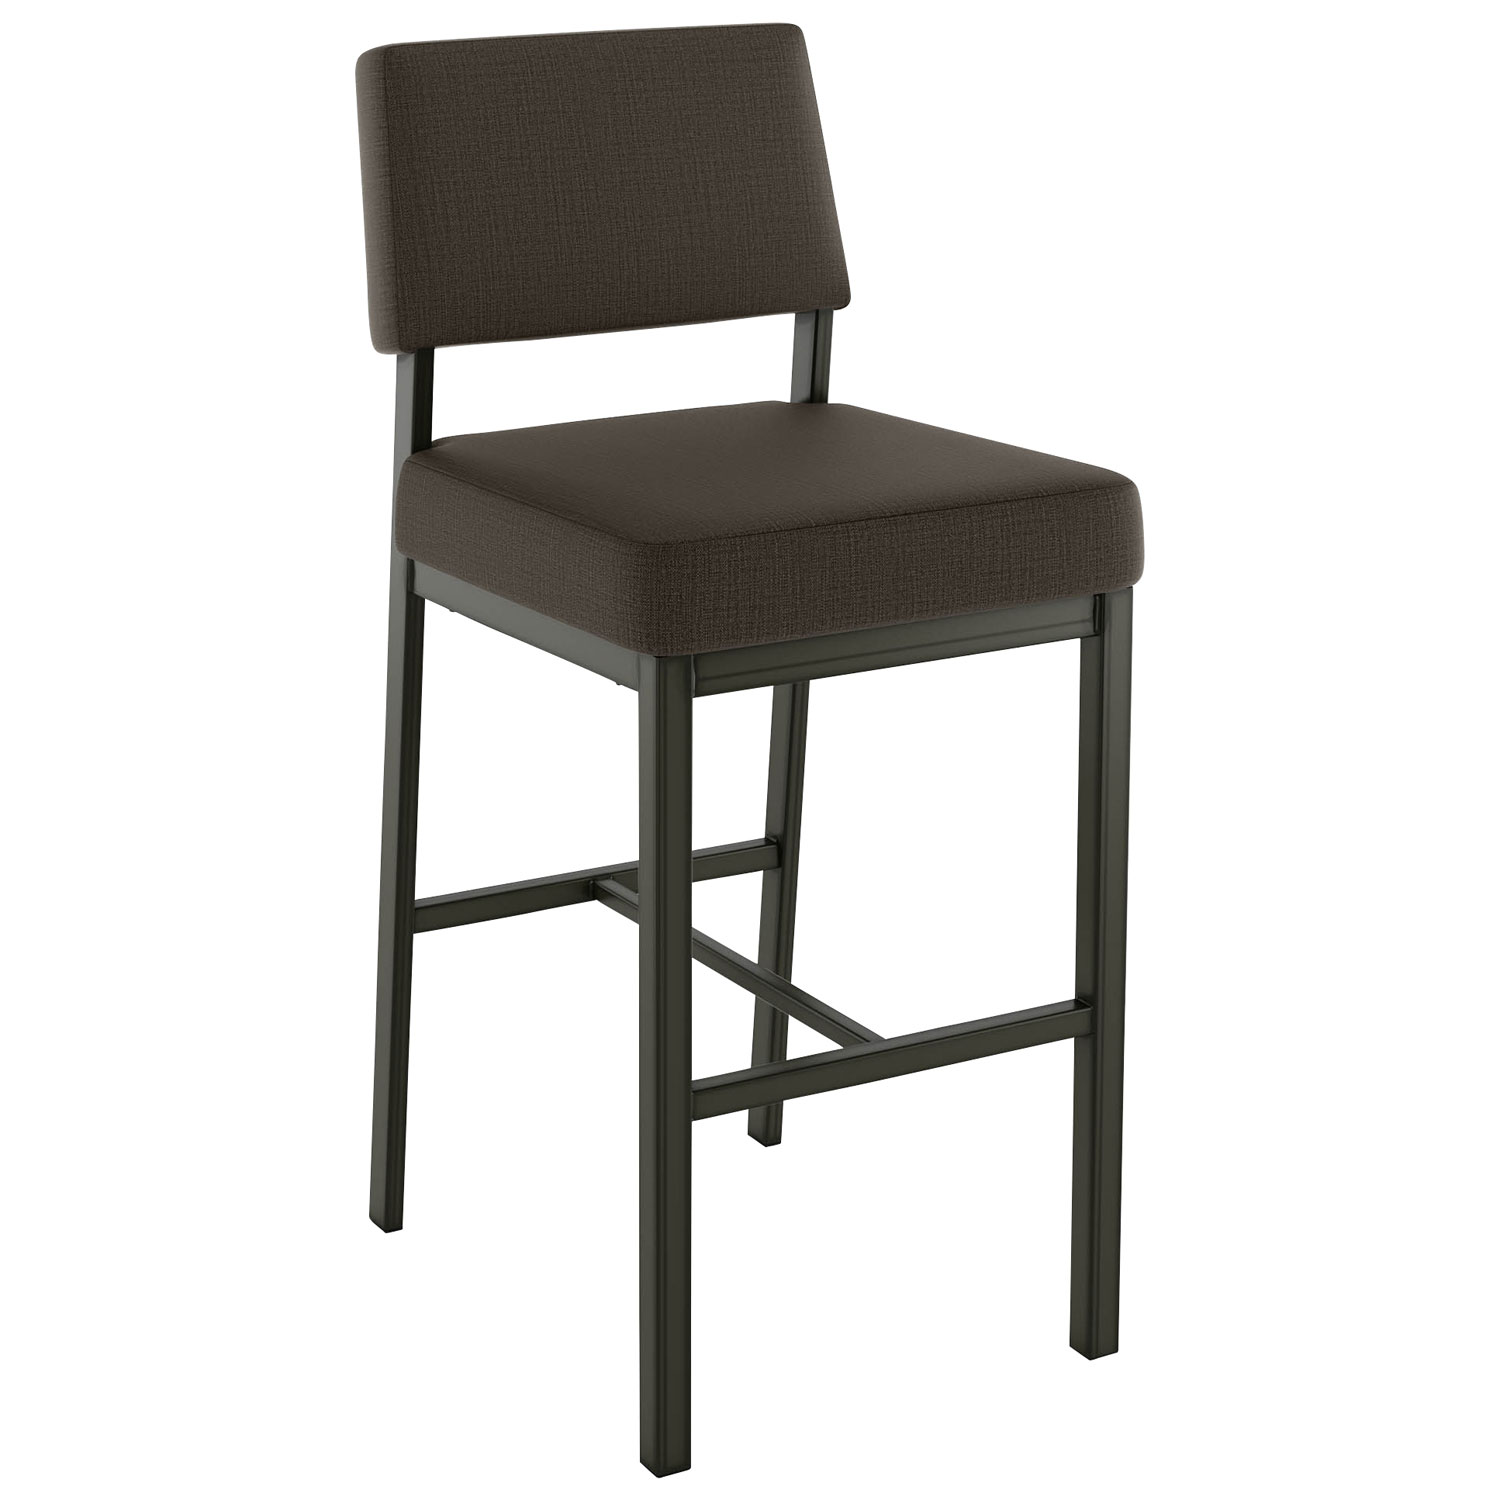 Avery Rustic Country Polyester Counter Height Barstool - Brown Grey/Grey